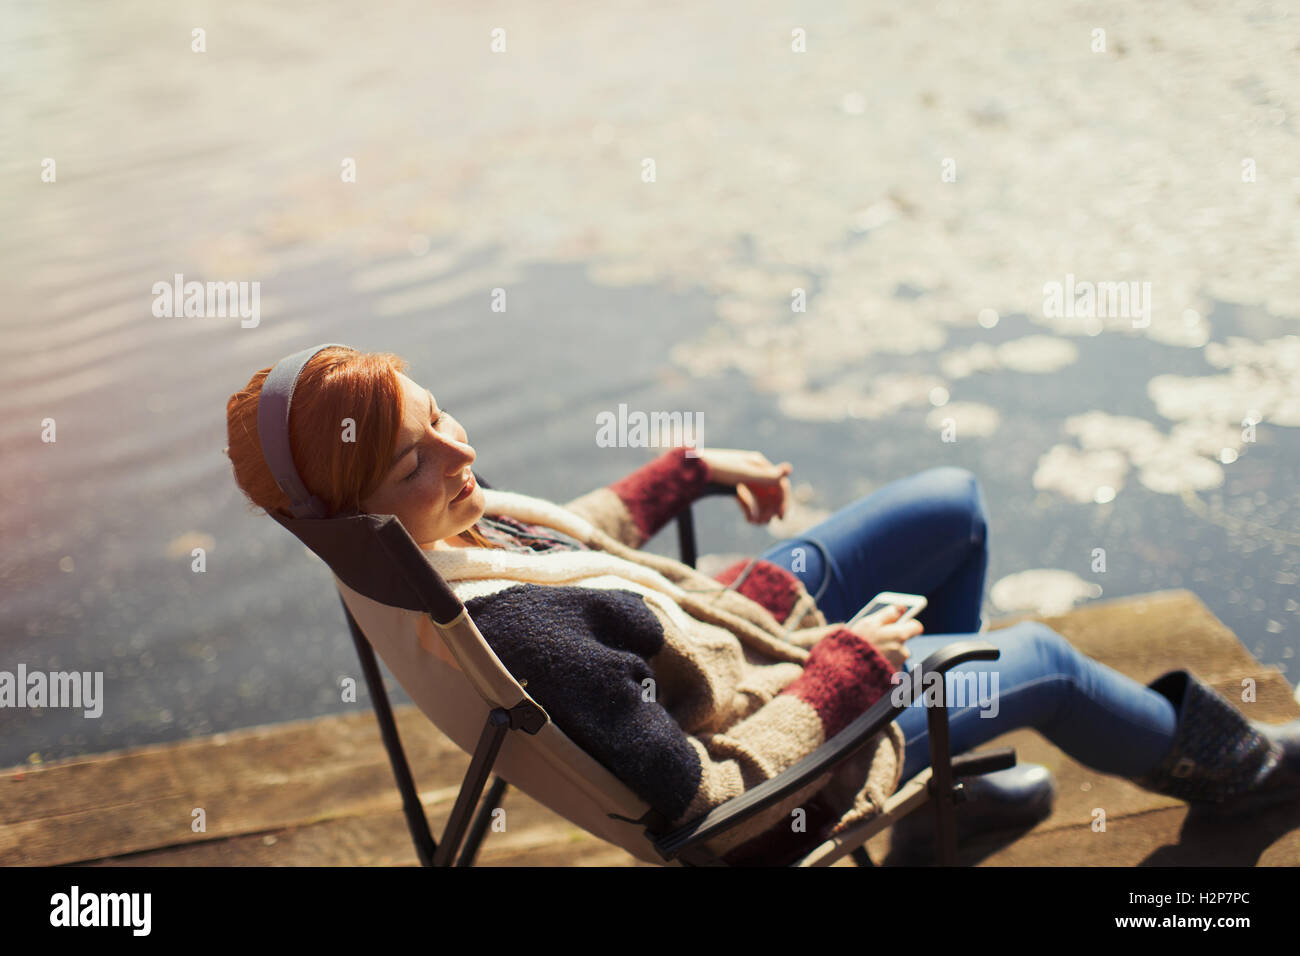 Serene woman relaxing listening to music with headphones and smart phone at sunny lakeside dock Stock Photo